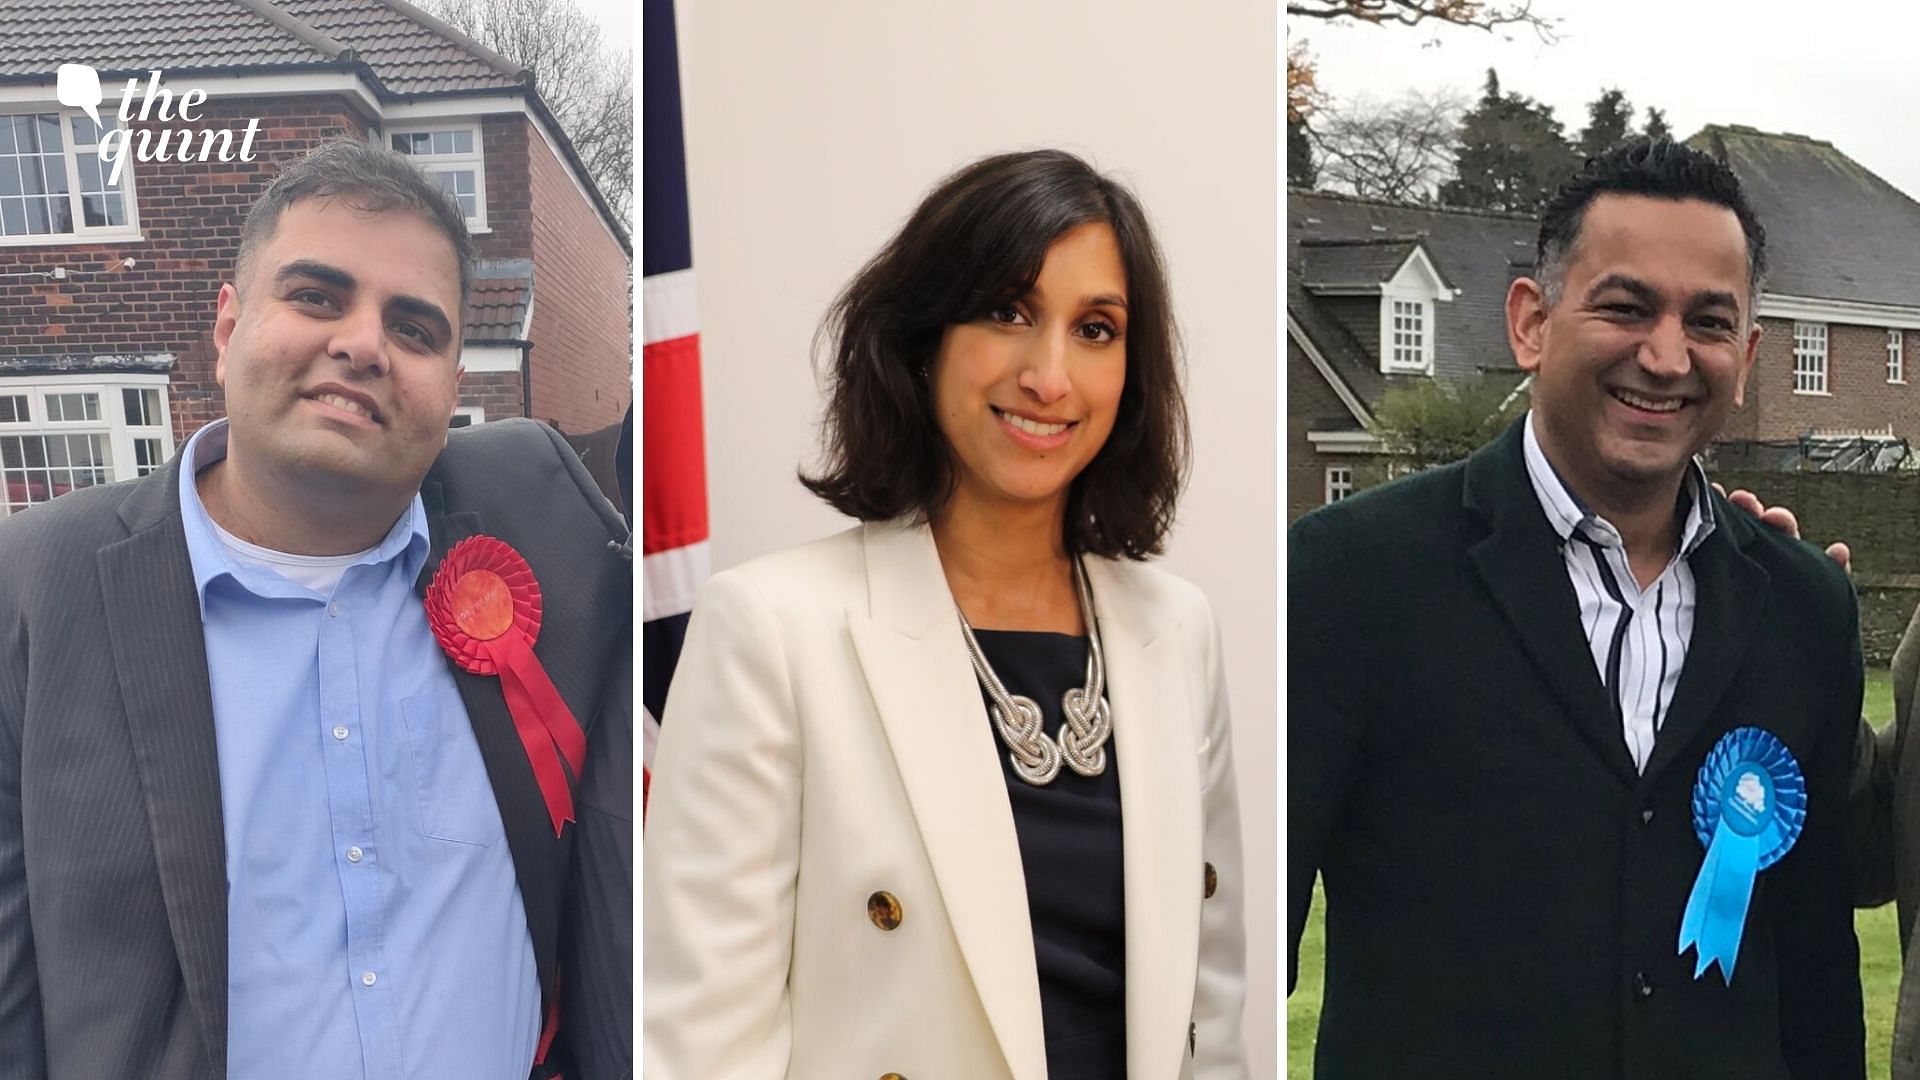 Three  Indian-origin first time parliamentarians: Labour’s Navendu Mishra and Conservatives’ Claire Coutinho and Gagan Mohindra.